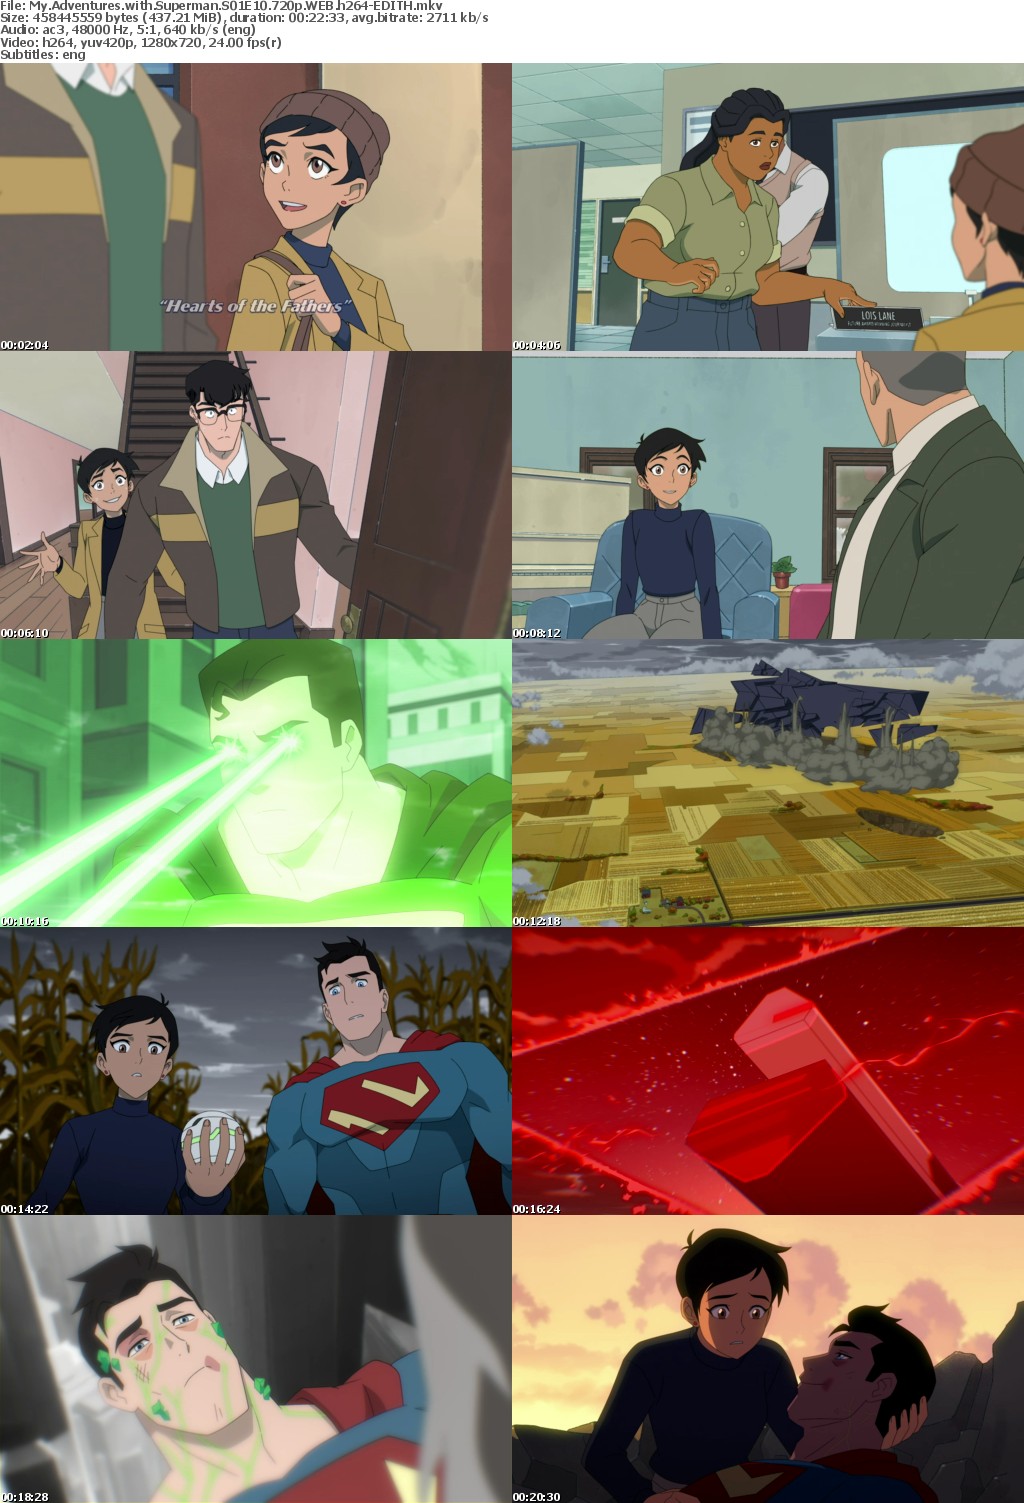 My Adventures with Superman S01E10 720p WEB h264-EDITH